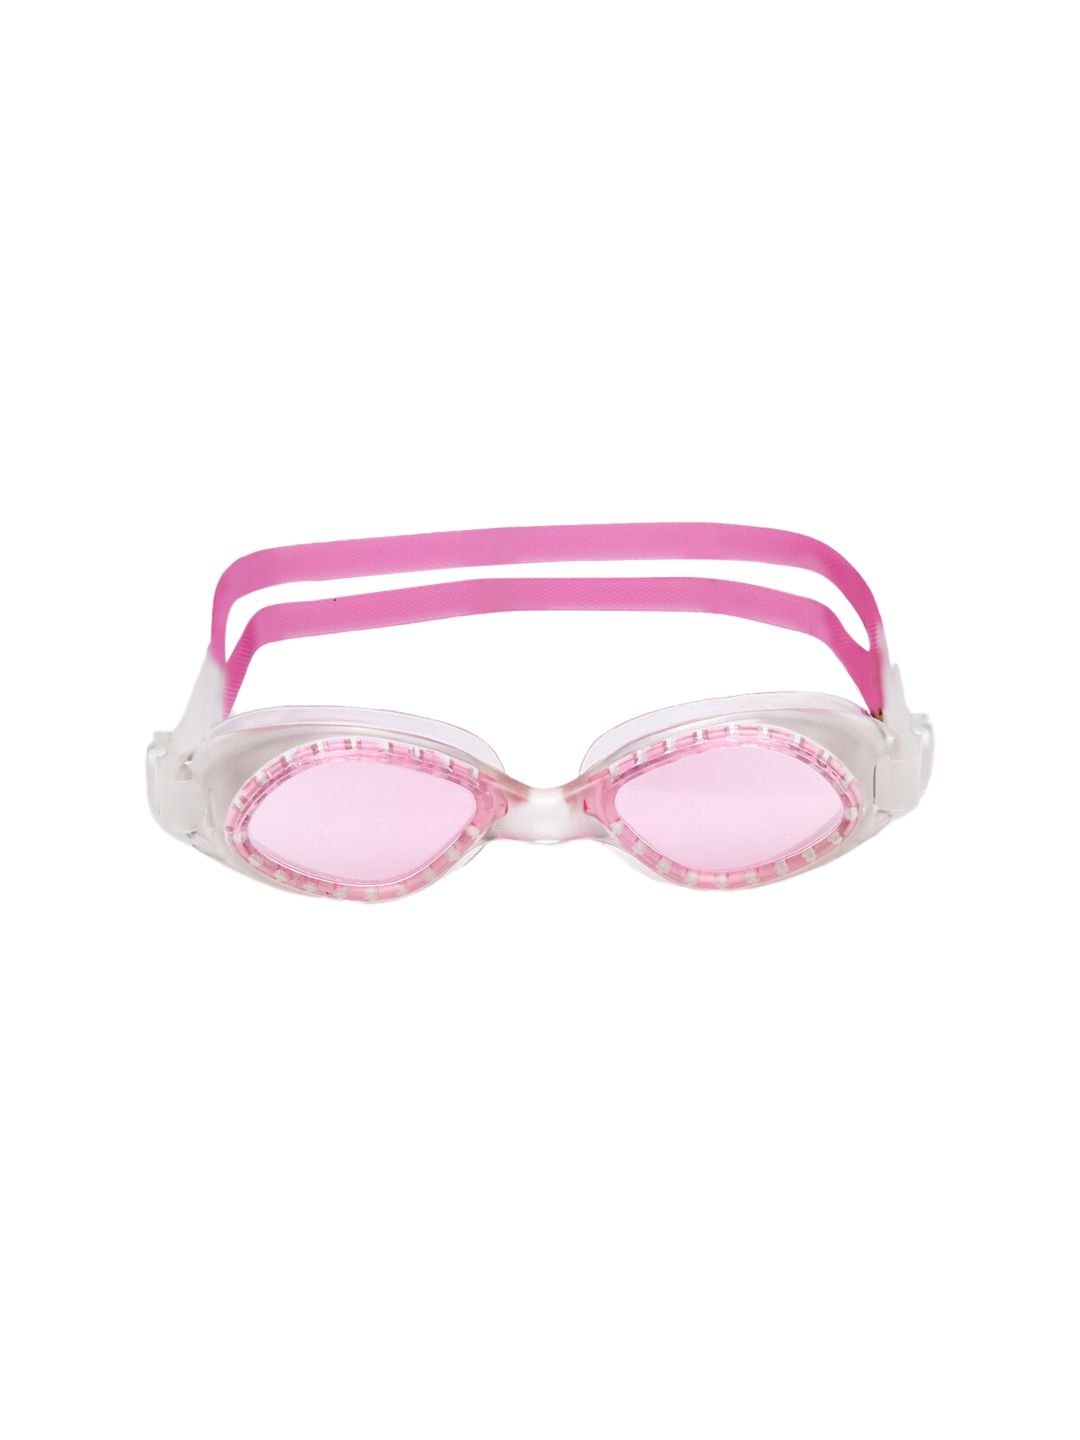 CUKOO Women Pink Solid Comfort-Fit Swimming Goggles Price in India